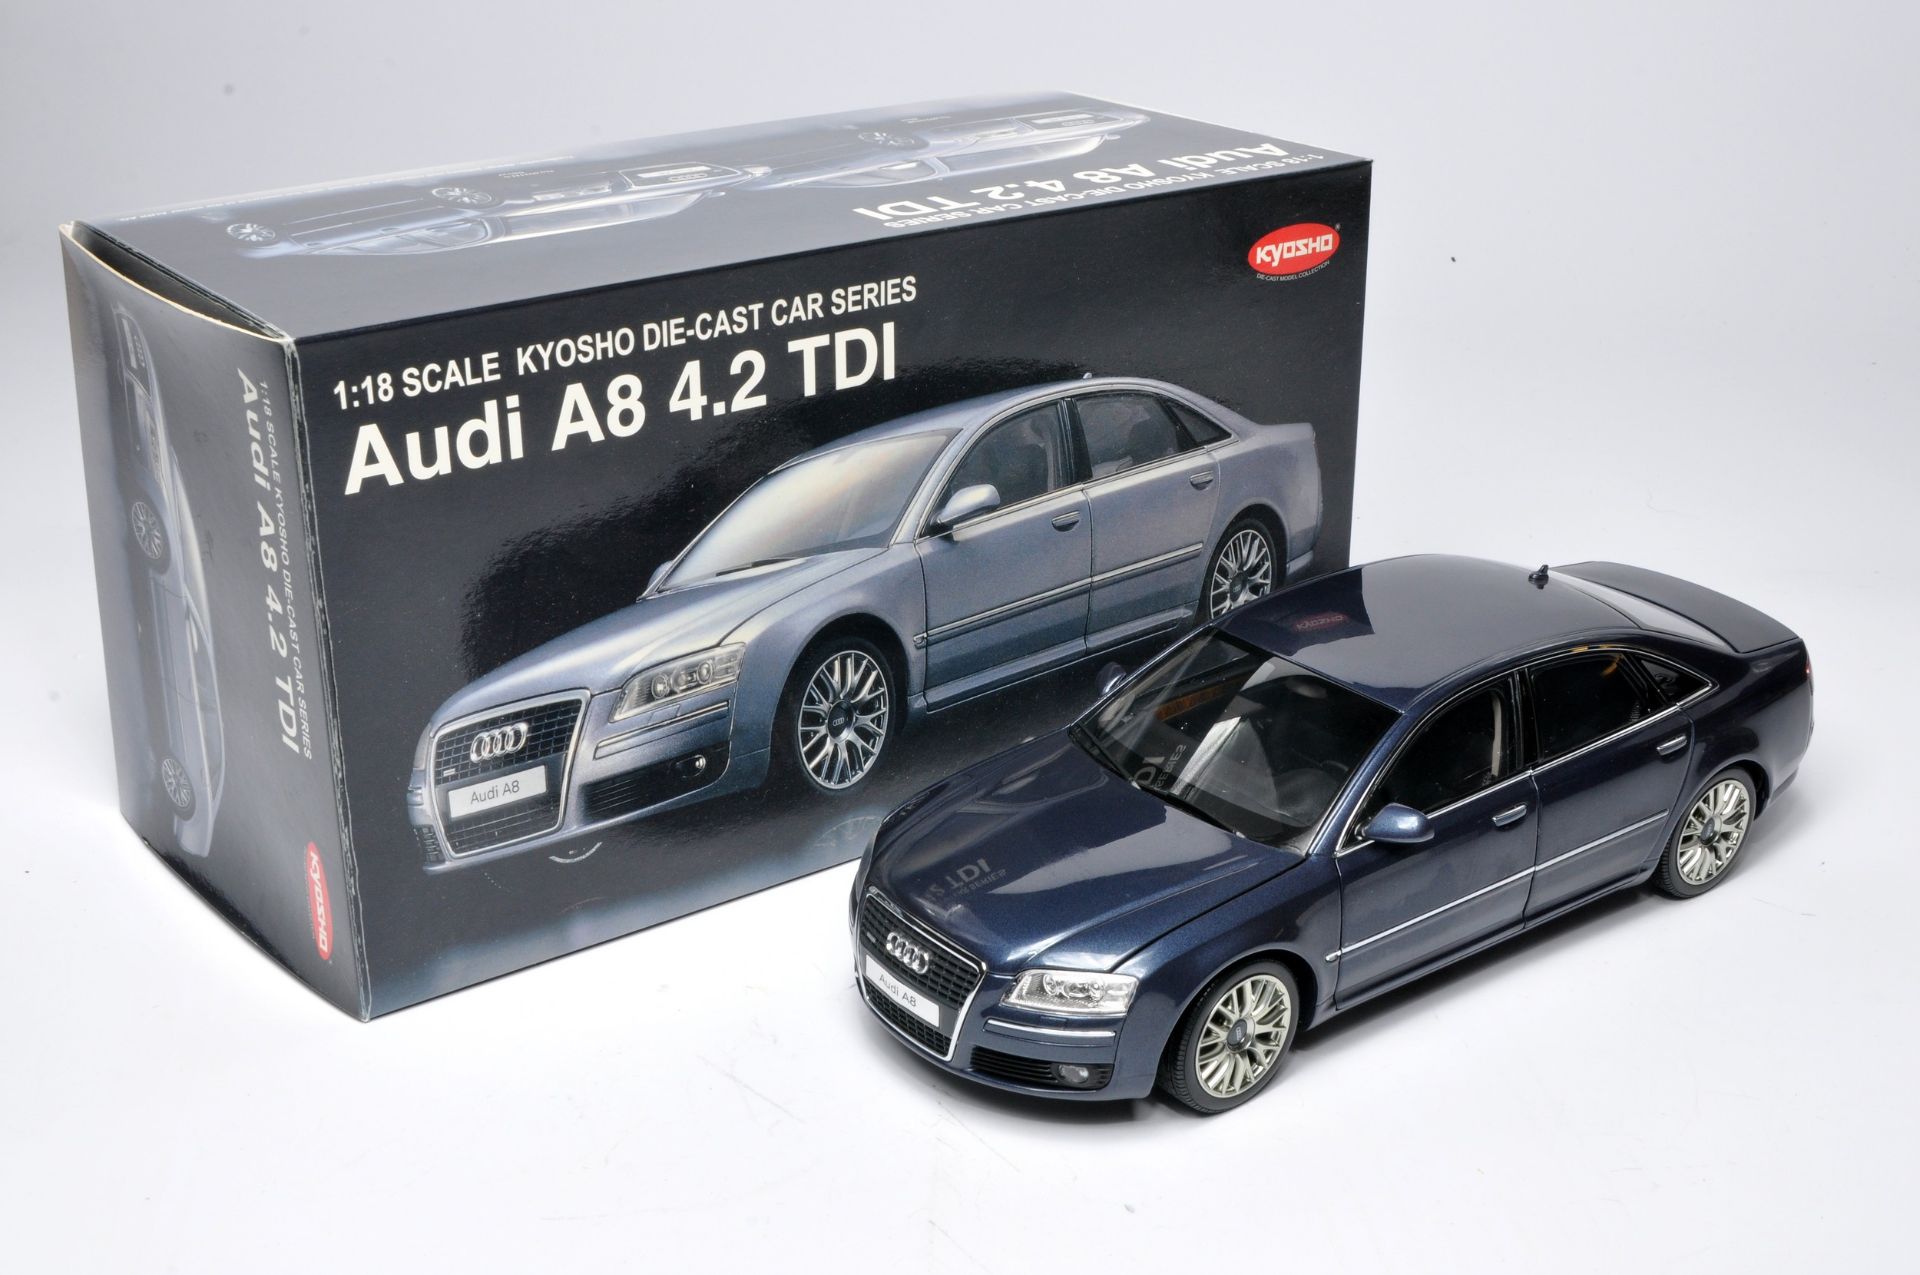 Kyosho 1/18 diecast model car issue comprising Audi A8 4.2 TDI. Looks to be without obvious sign